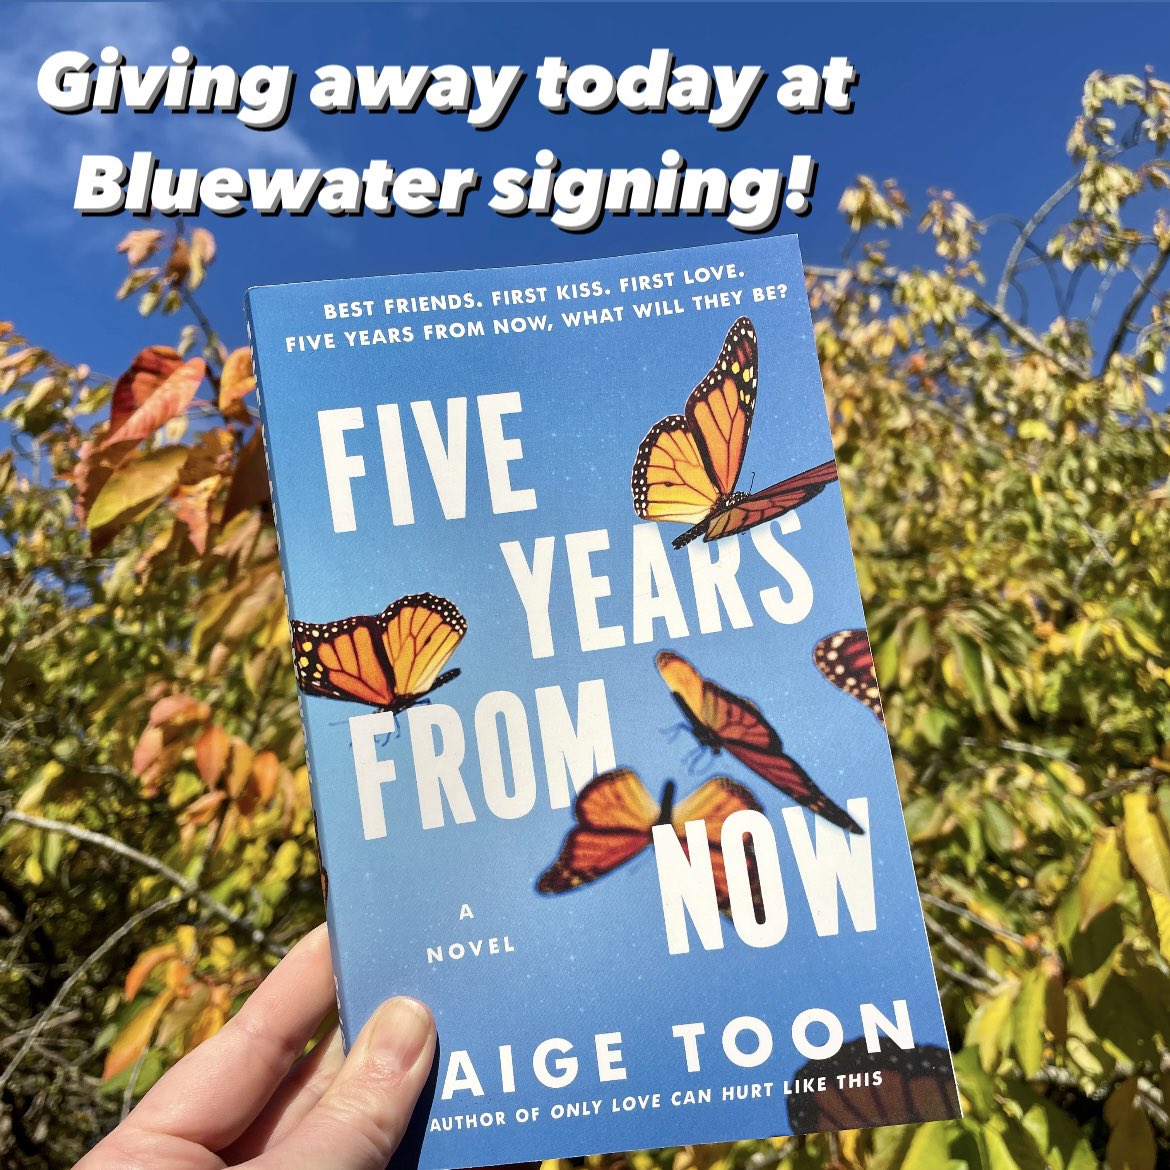 I have ten copies of the US edition of #FiveYearsFromNow to give away to the first ten readers in the queue who have bought a copy of #SevenSummers from @Bluewaterstones today! See you there from 12.30pm xxx